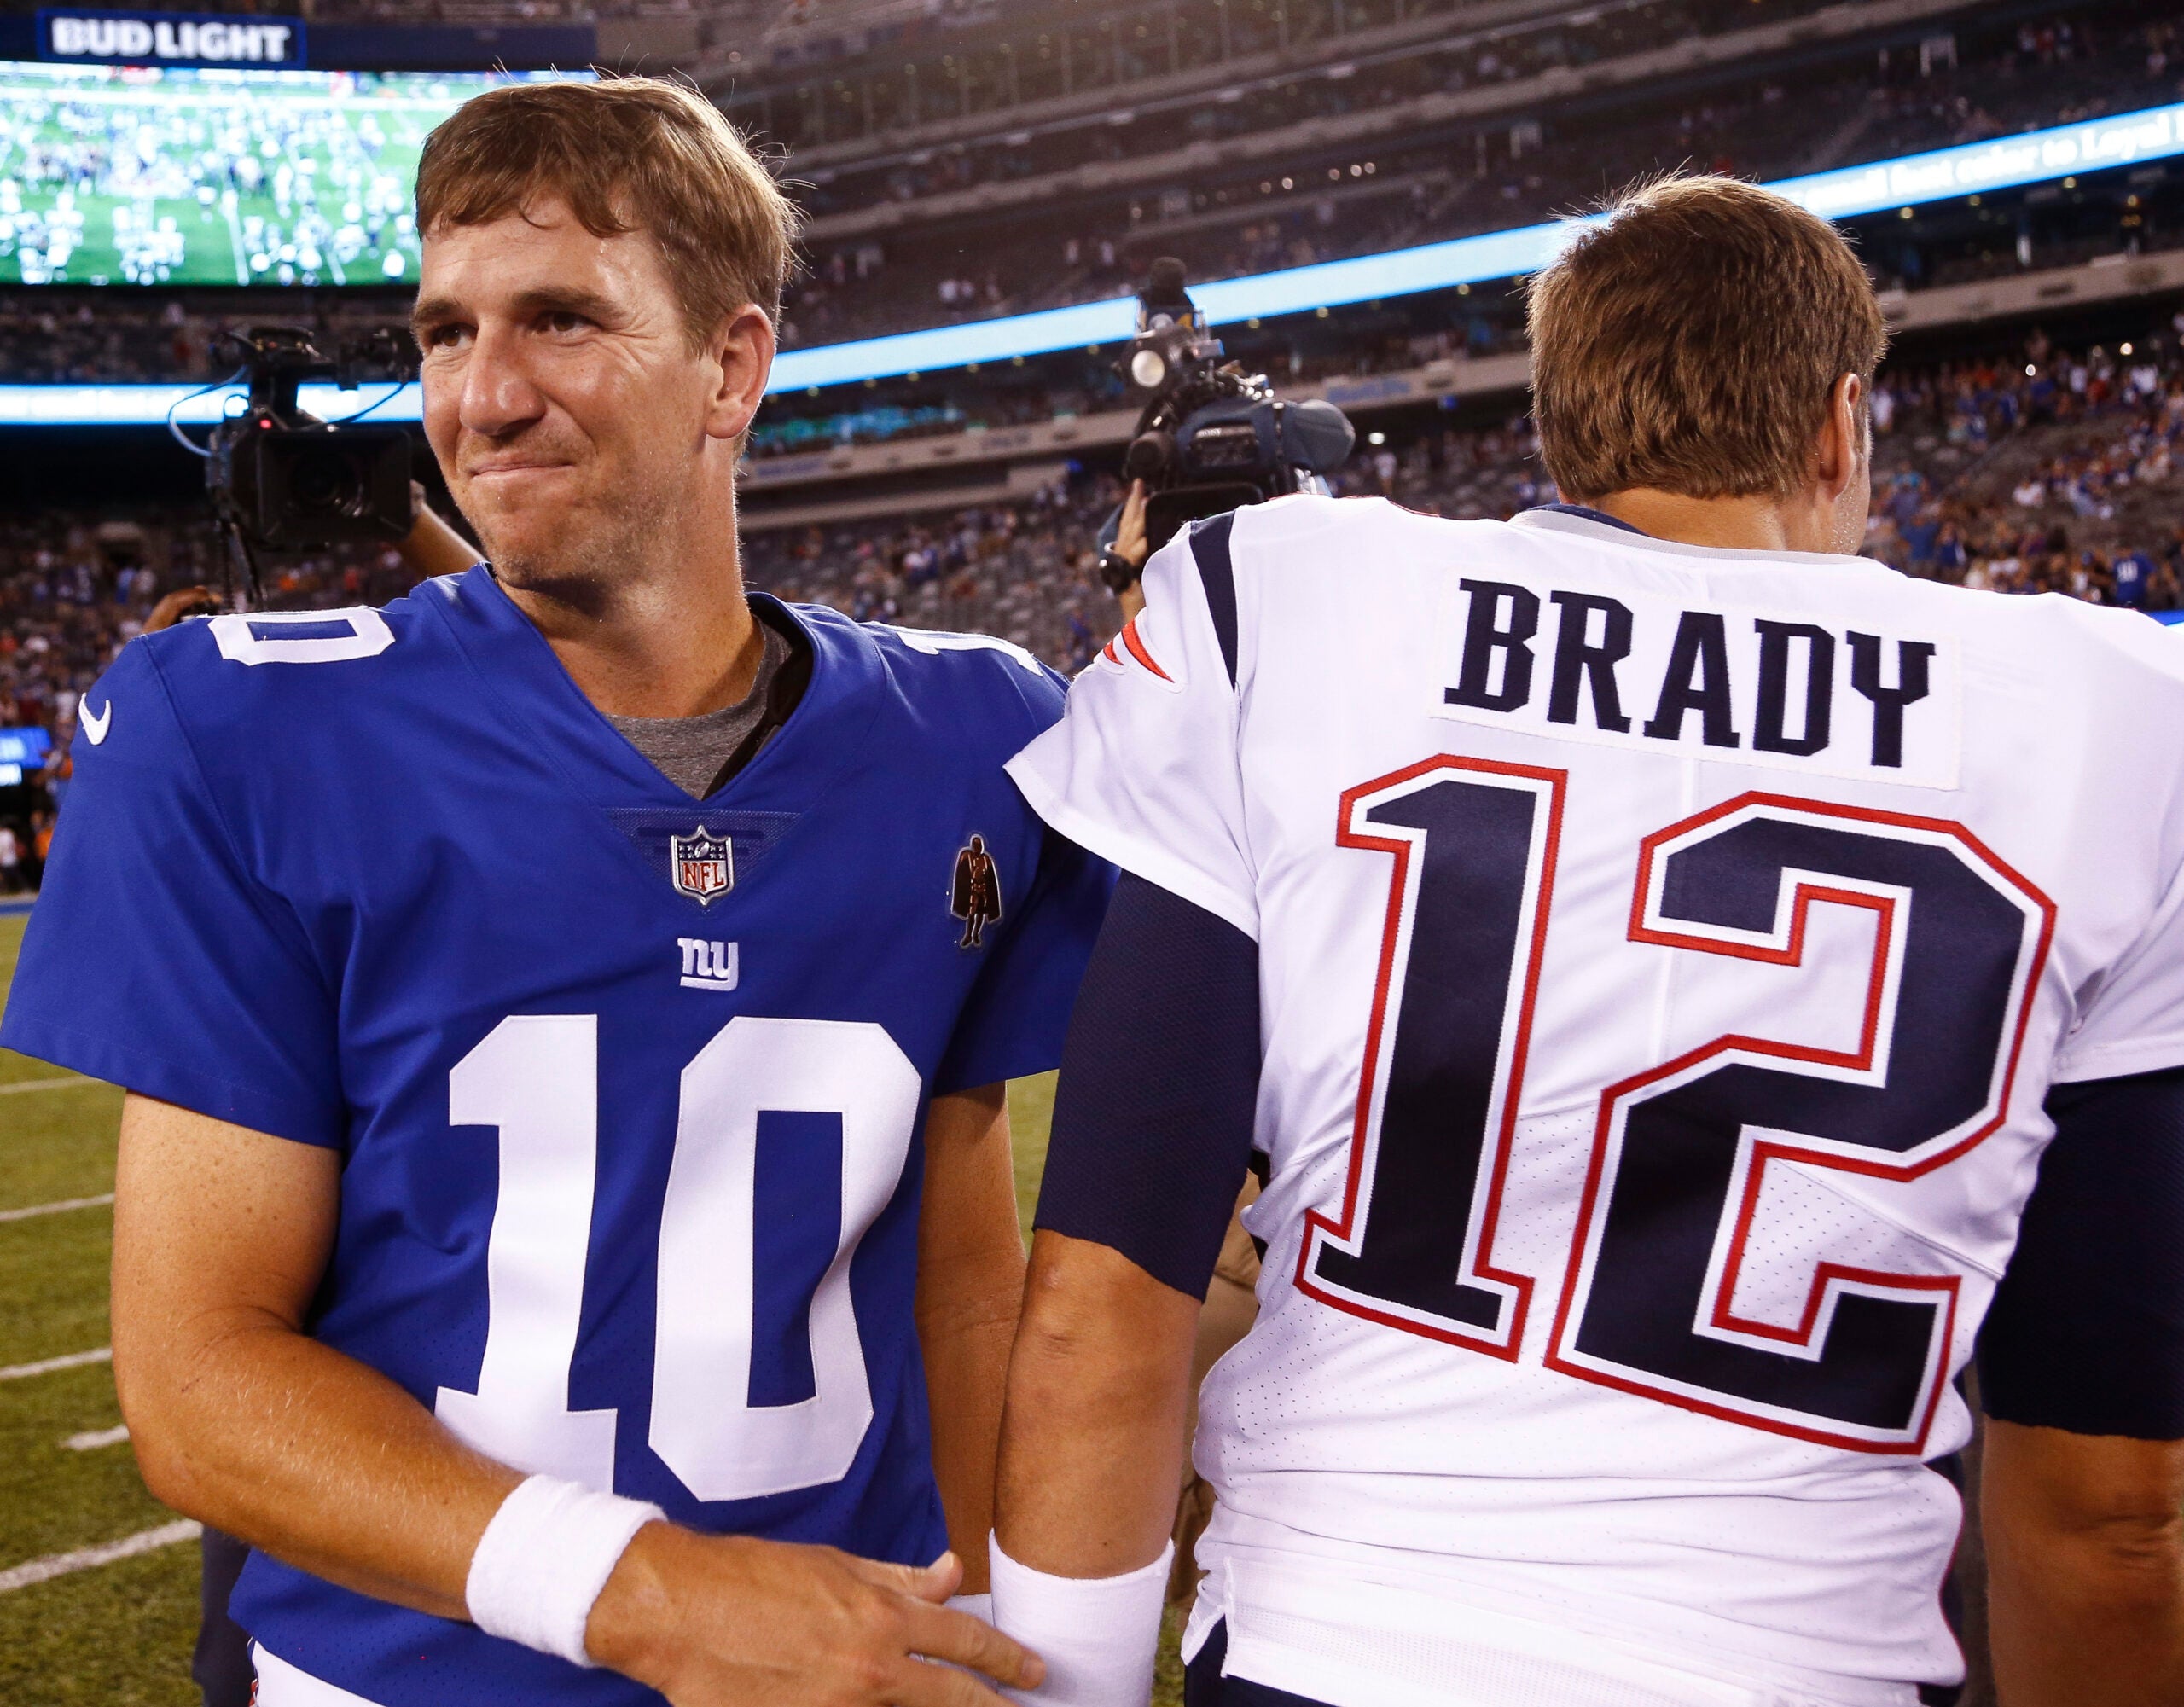 Tom Brady congratulated Eli Manning on his retirement, but not on